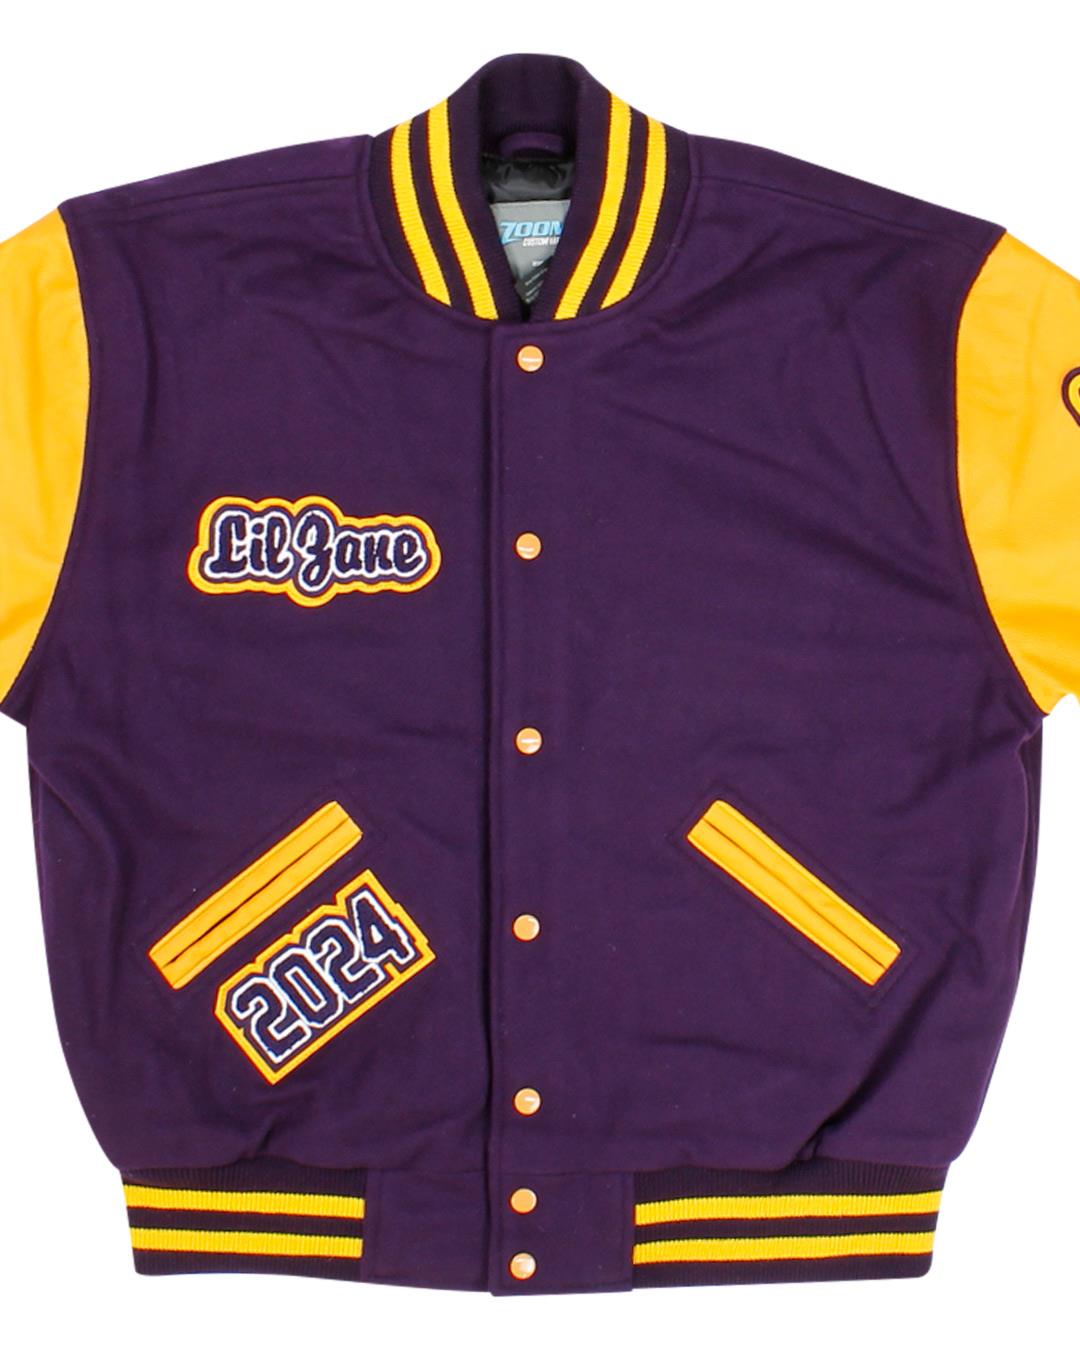 Fowler High School Letterman Jacket, Fowler CO - Front